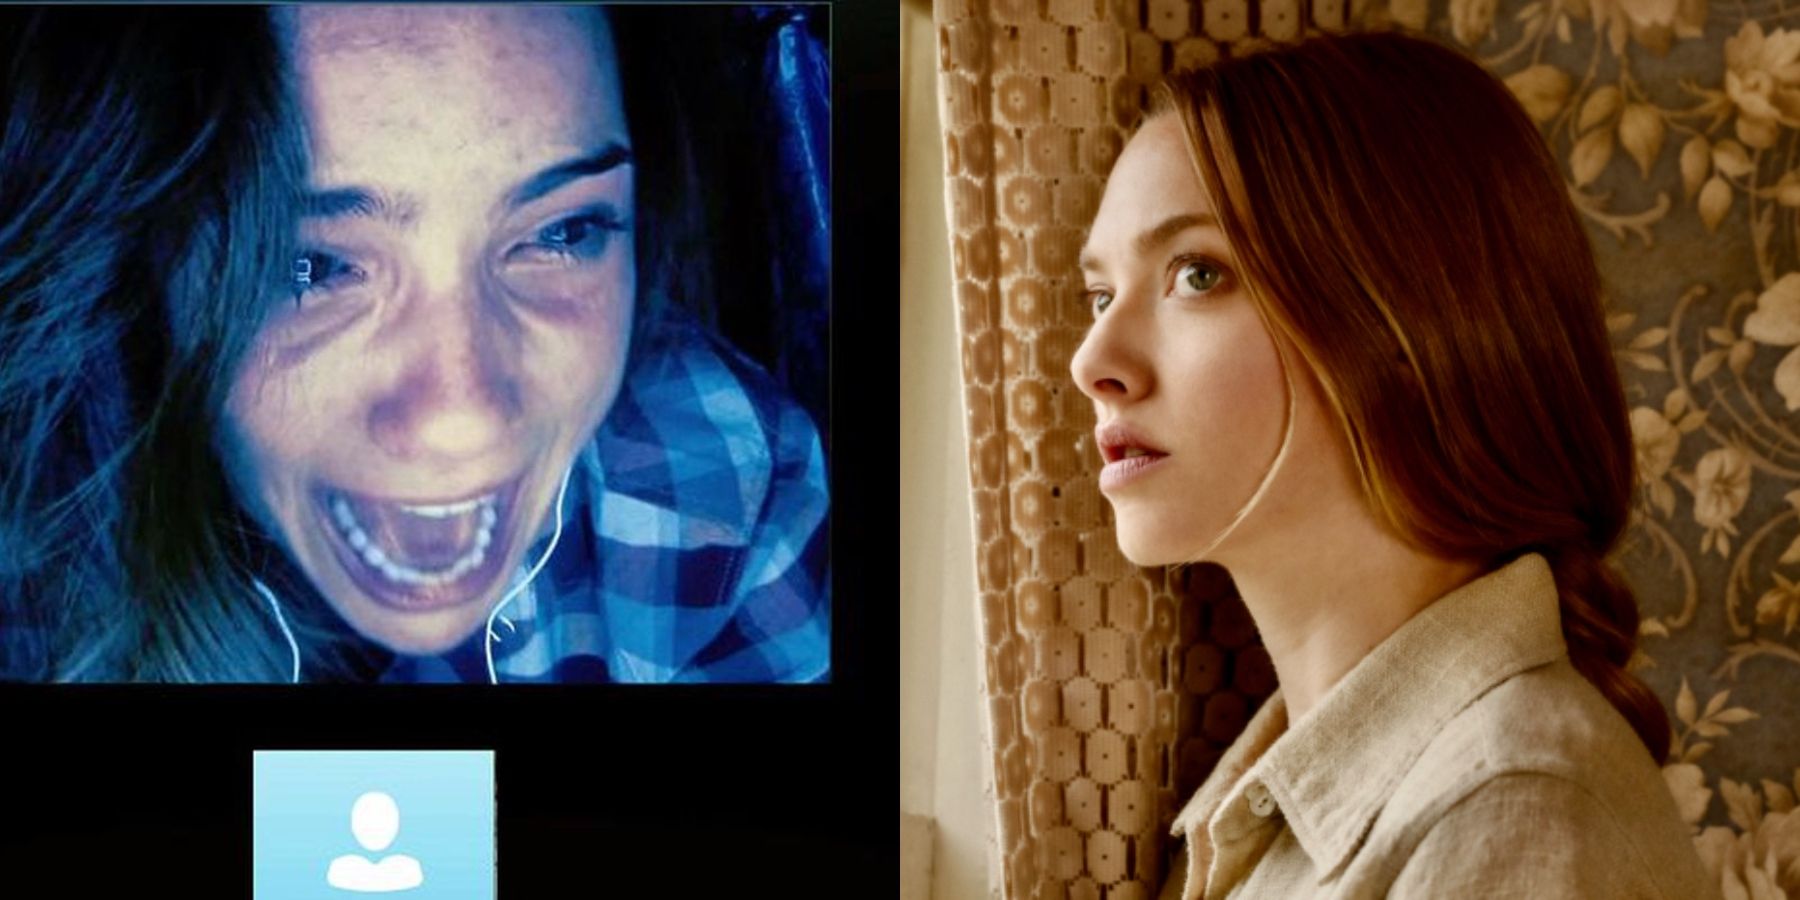 Blair (Shelly Henning) in Unfriended and Catherine (Amanda Seyfried) in Things Heard And Seen